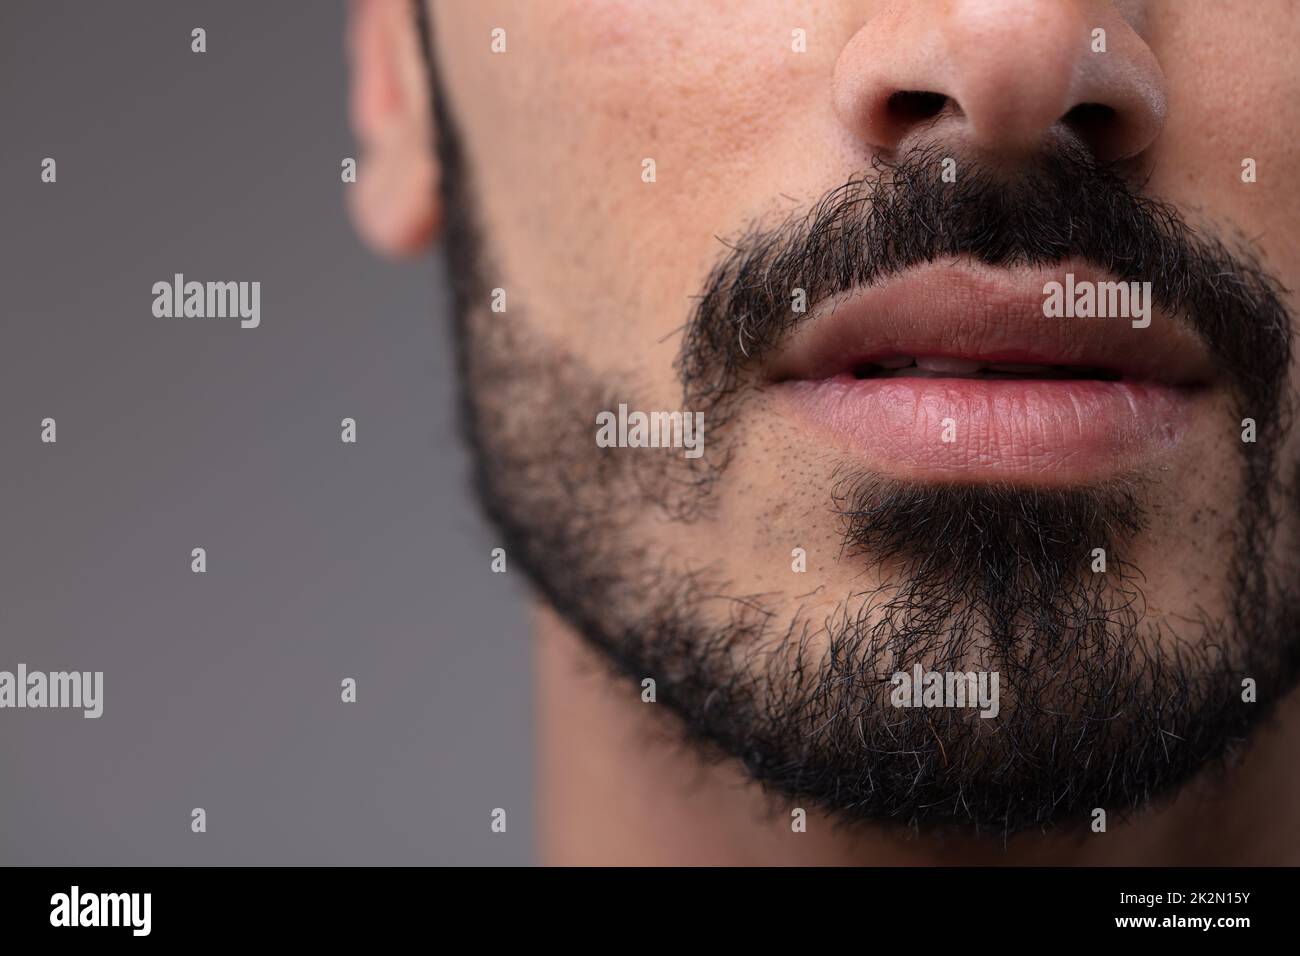 Close up on the mouth and chin of a bearded man Stock Photo